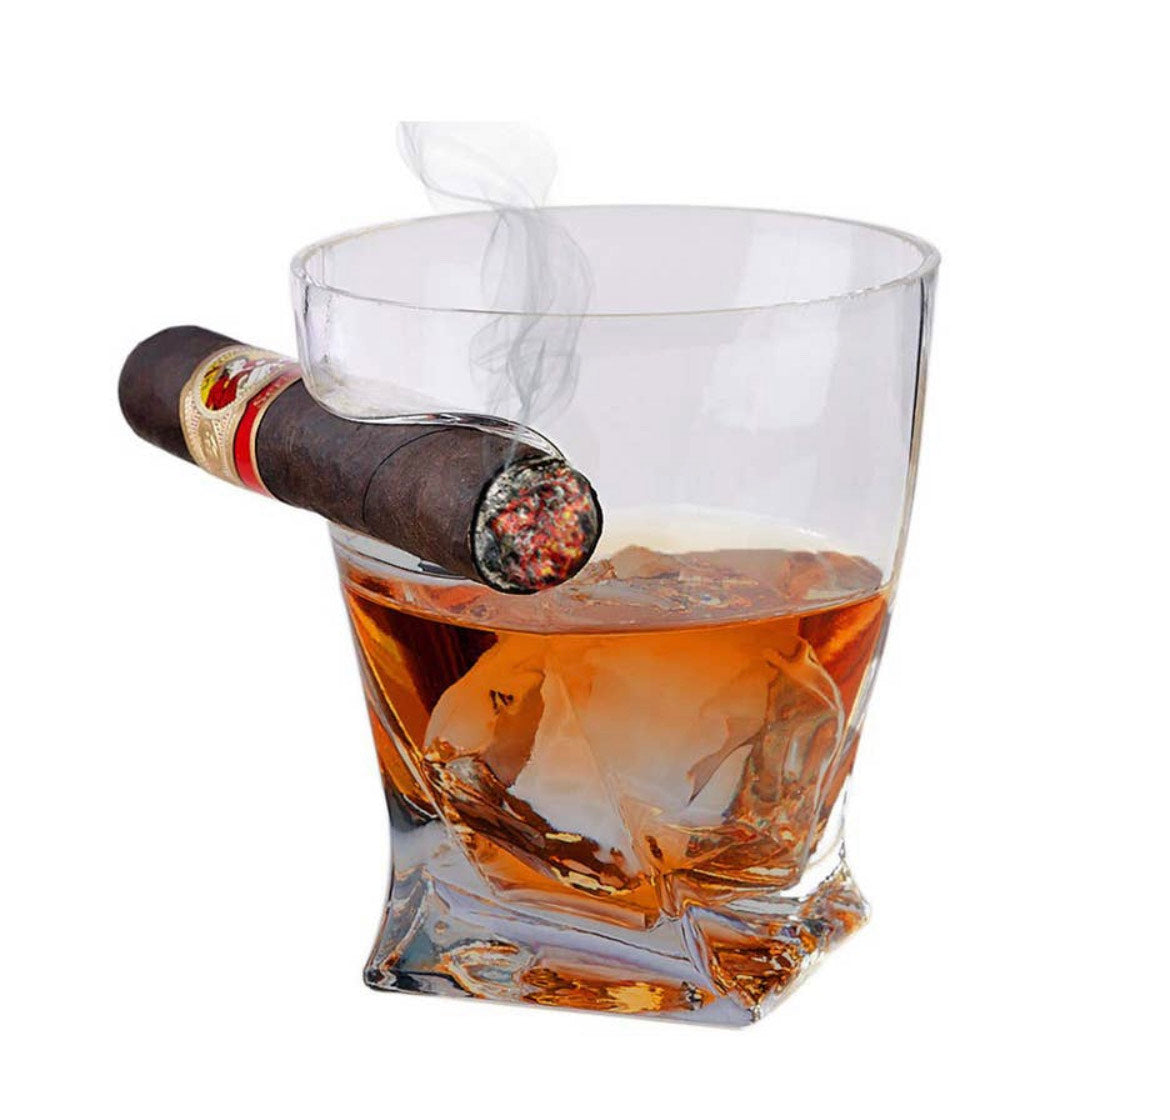 Bezrat Cigar Glass - Old Fashioned Whiskey